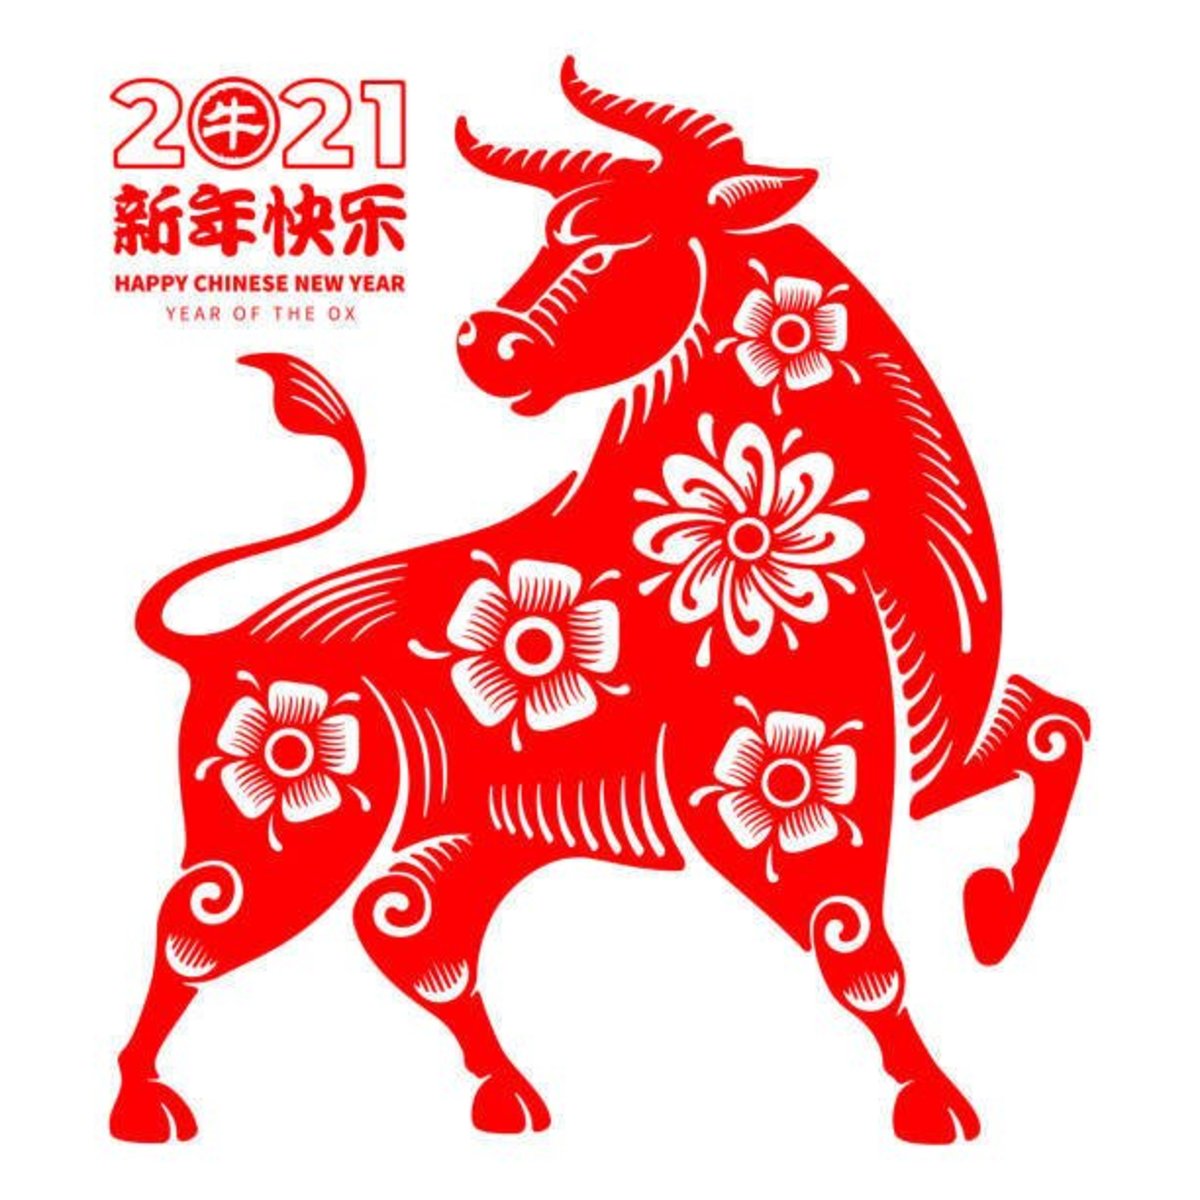 happy-lunar-new-year-in-chinese-character-photos-cantik